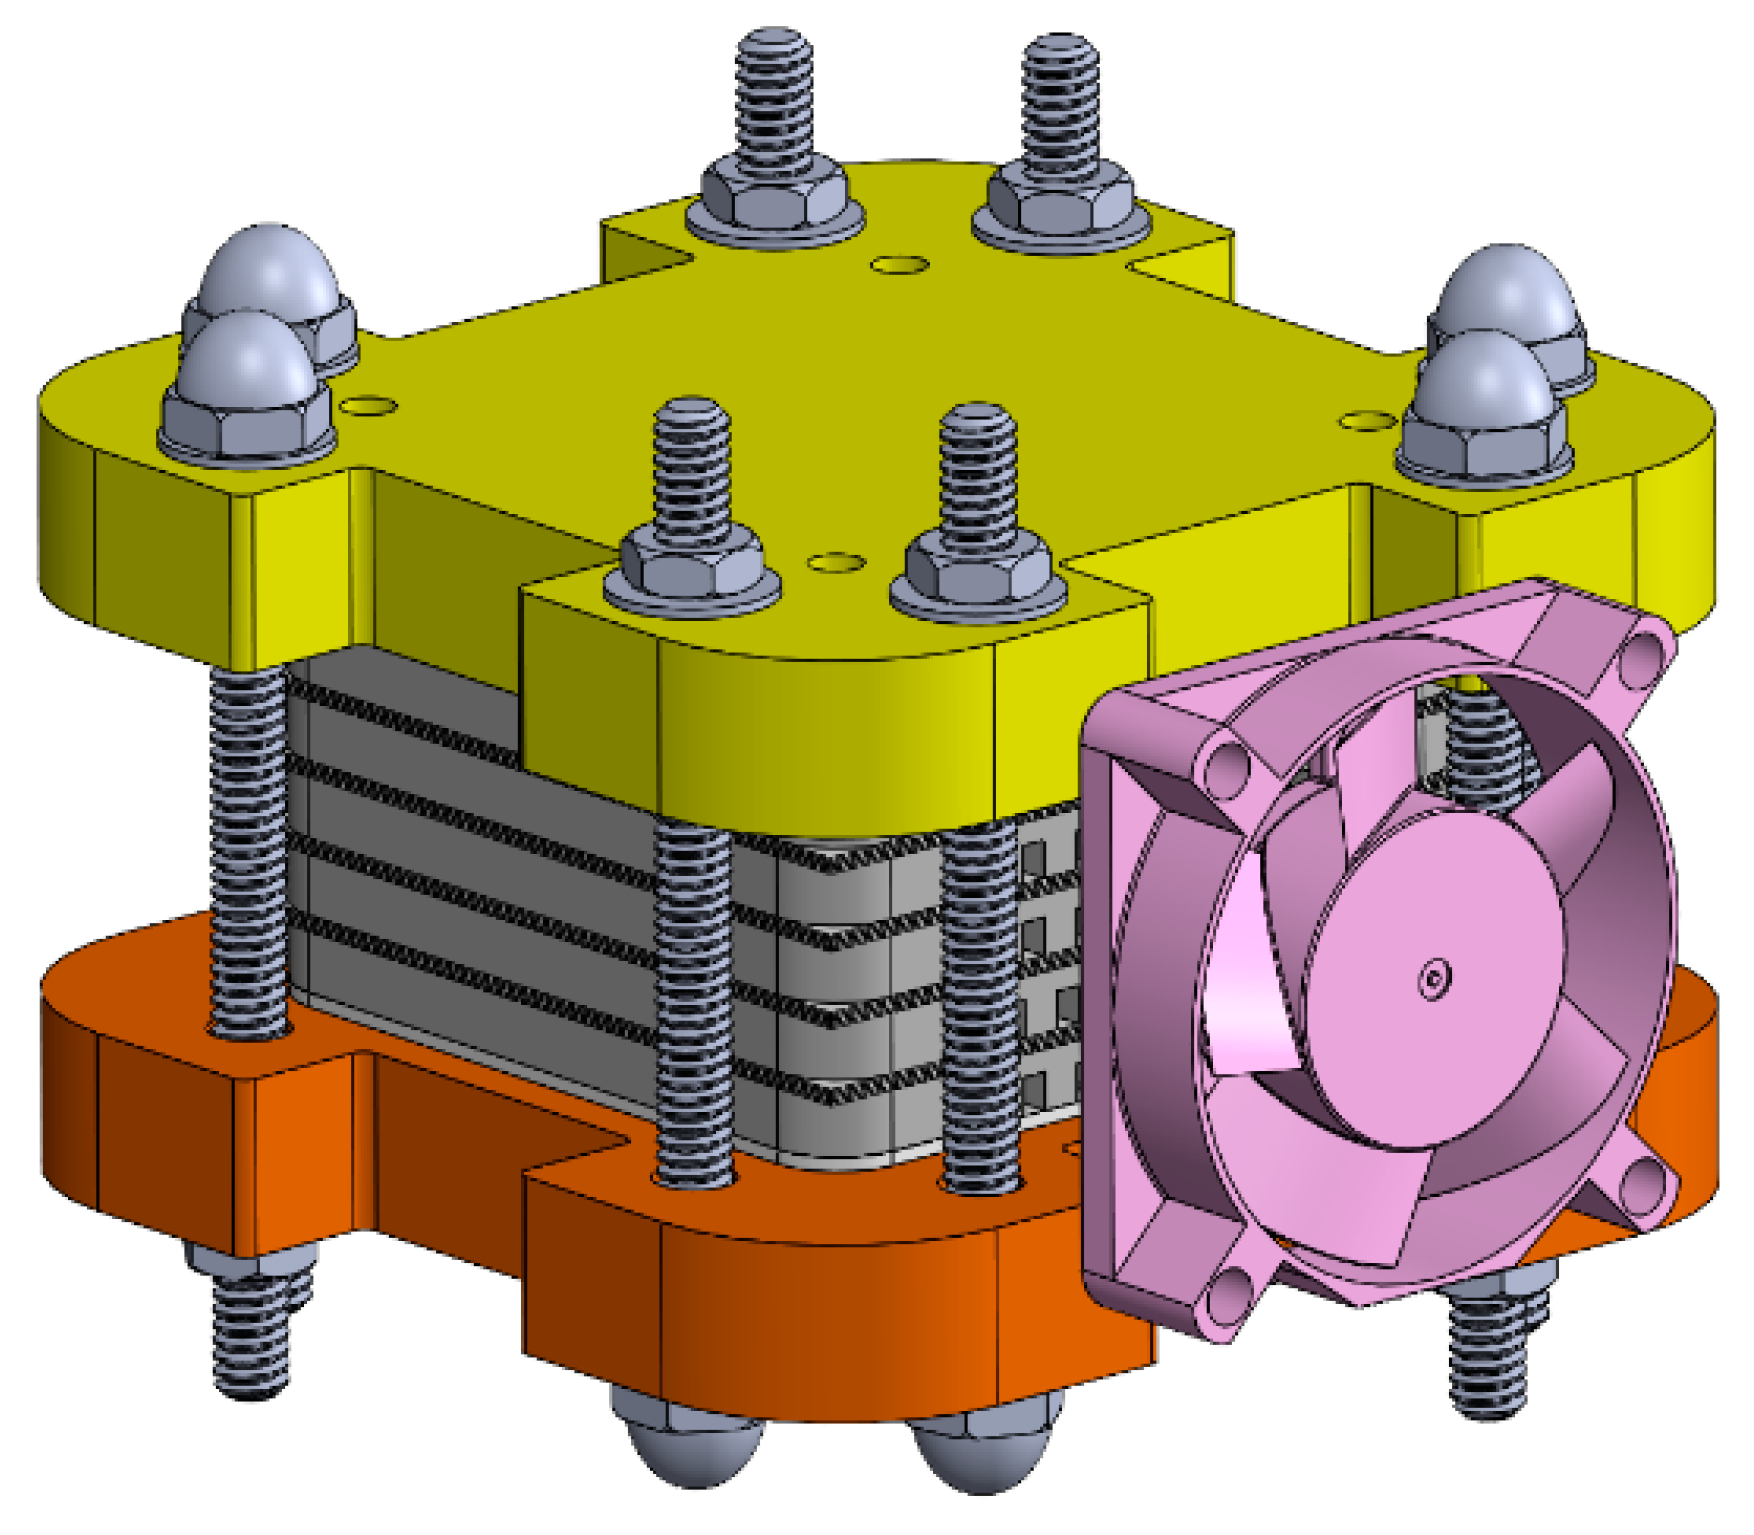 What determines the continous ratings of electric motors? - Electrical  Engineering Stack Exchange